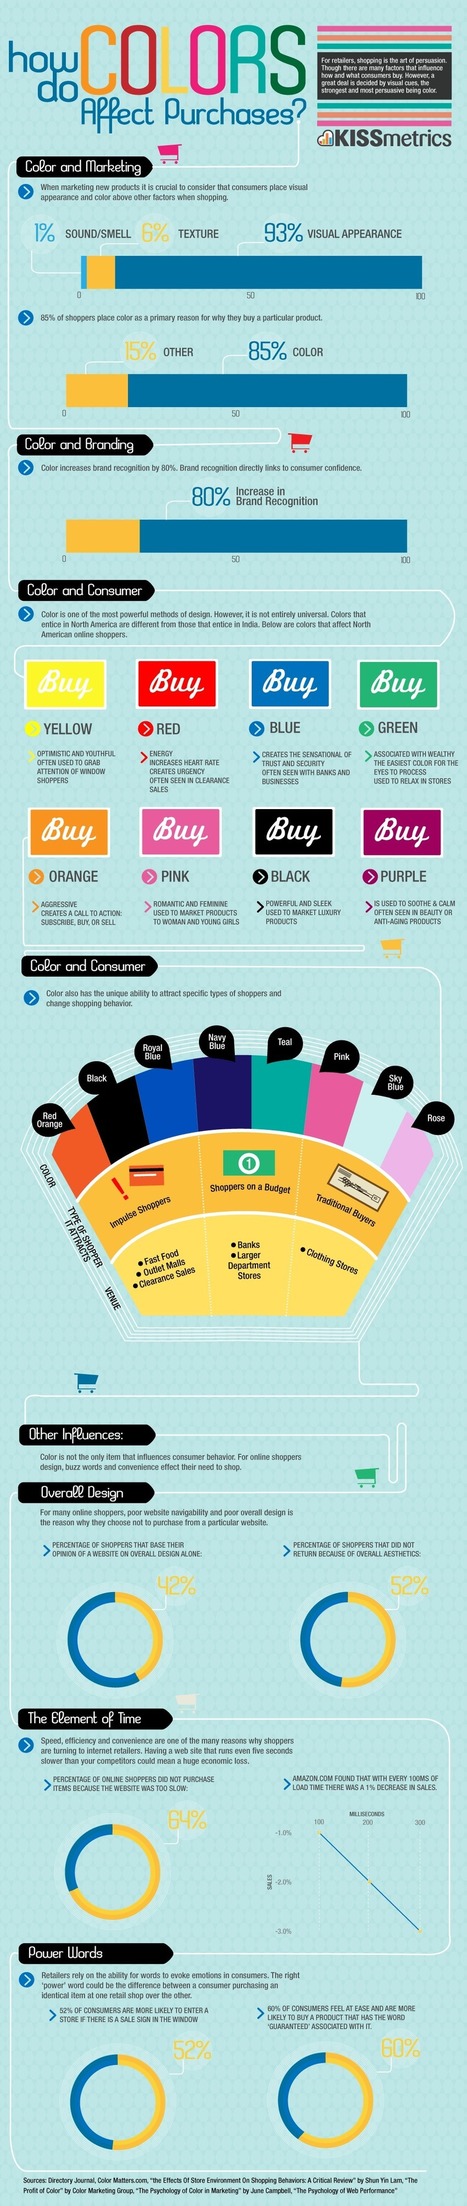 The Role of Color in Marketing [INFOGRAPHIC] | Information Technology & Social Media News | Scoop.it